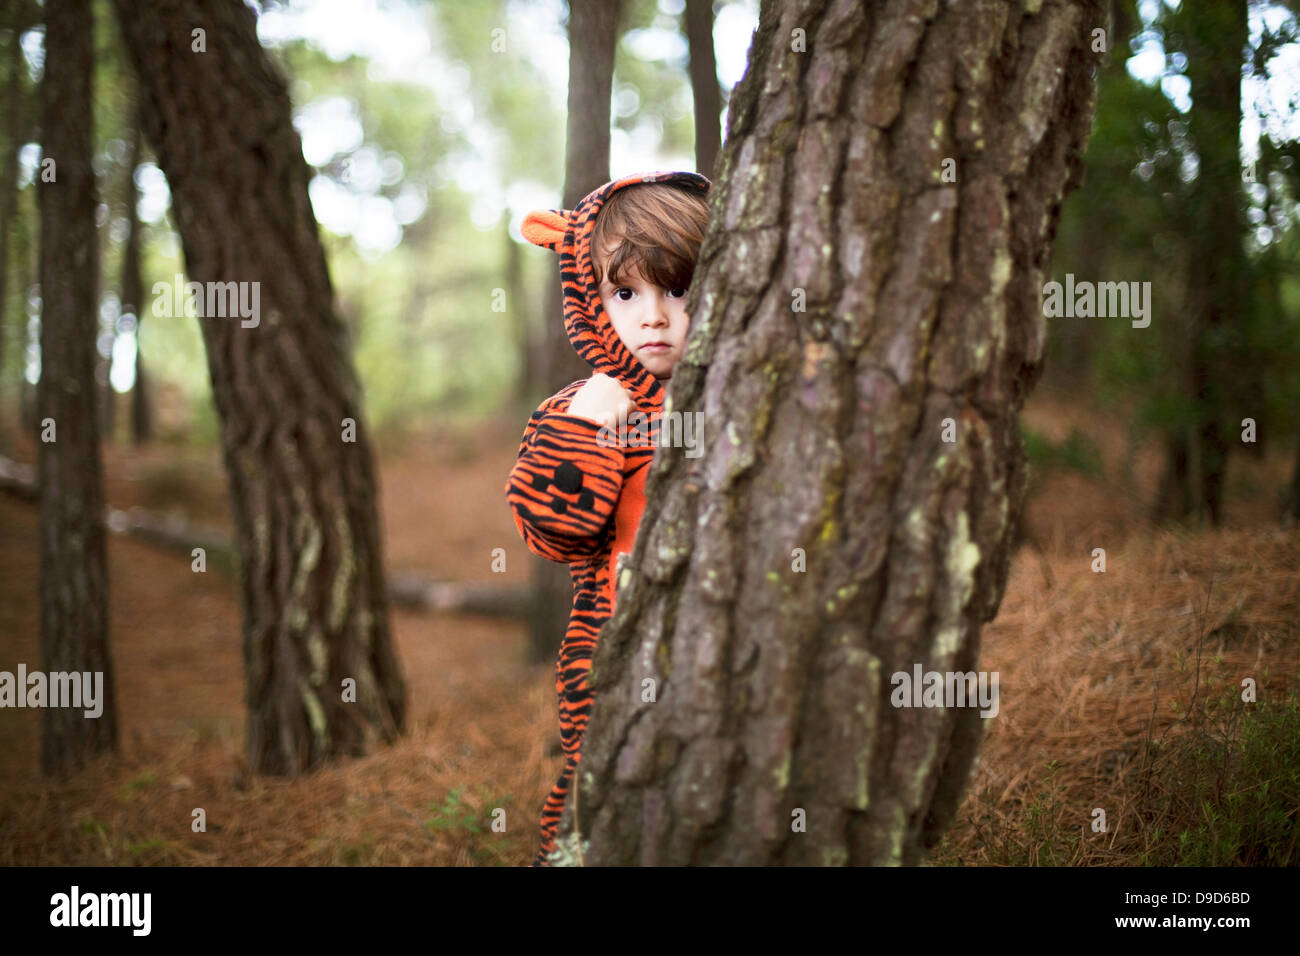 Male toddler wearing tiger suit hiding behind tree Stock Photo